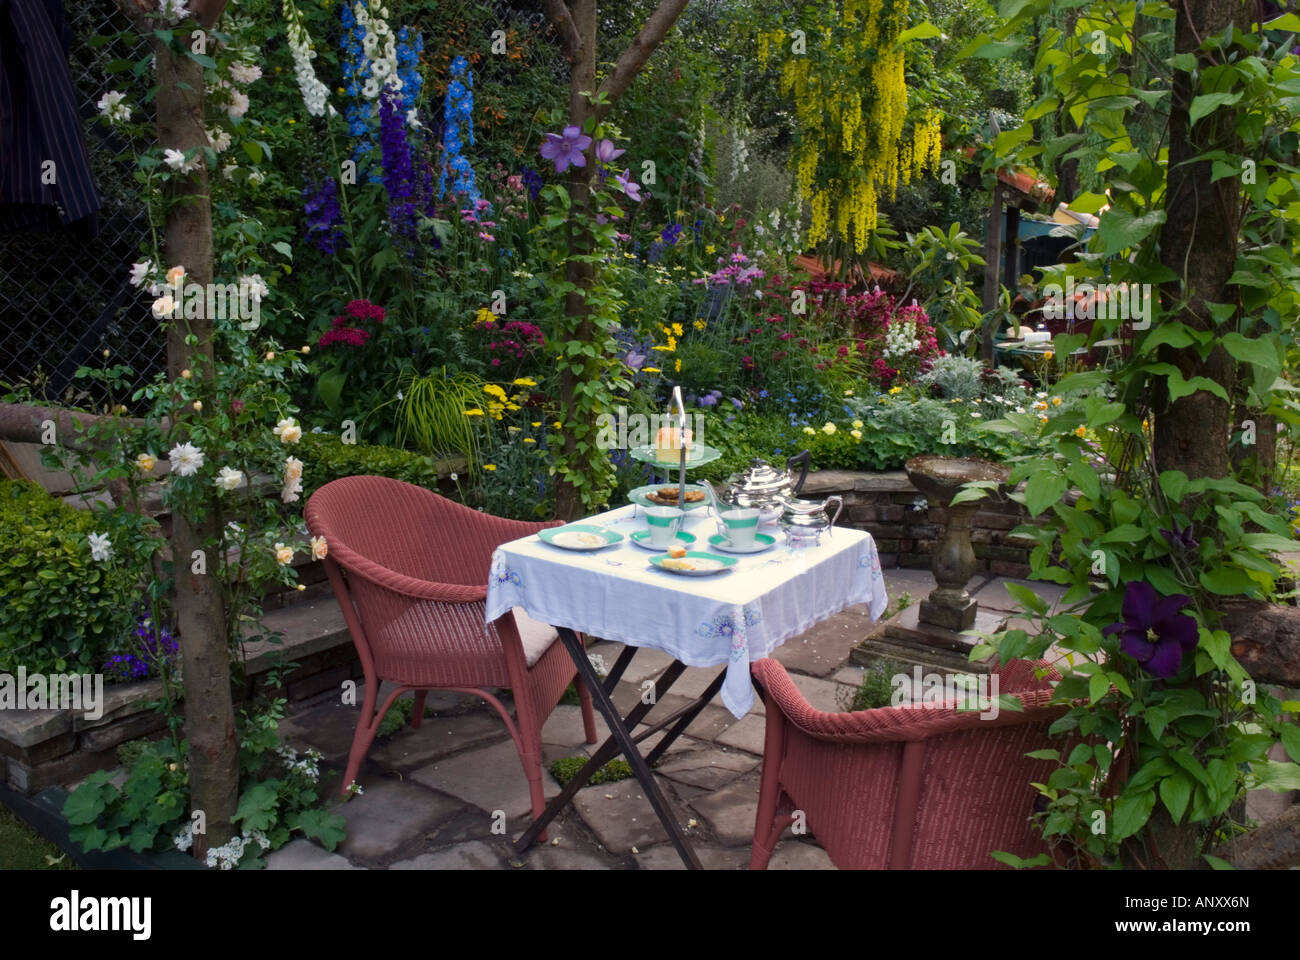 Lush garden set for eating tea or breakfast with chairs & table dining on the patio, filled with colorful flowers and plants Stock Photo